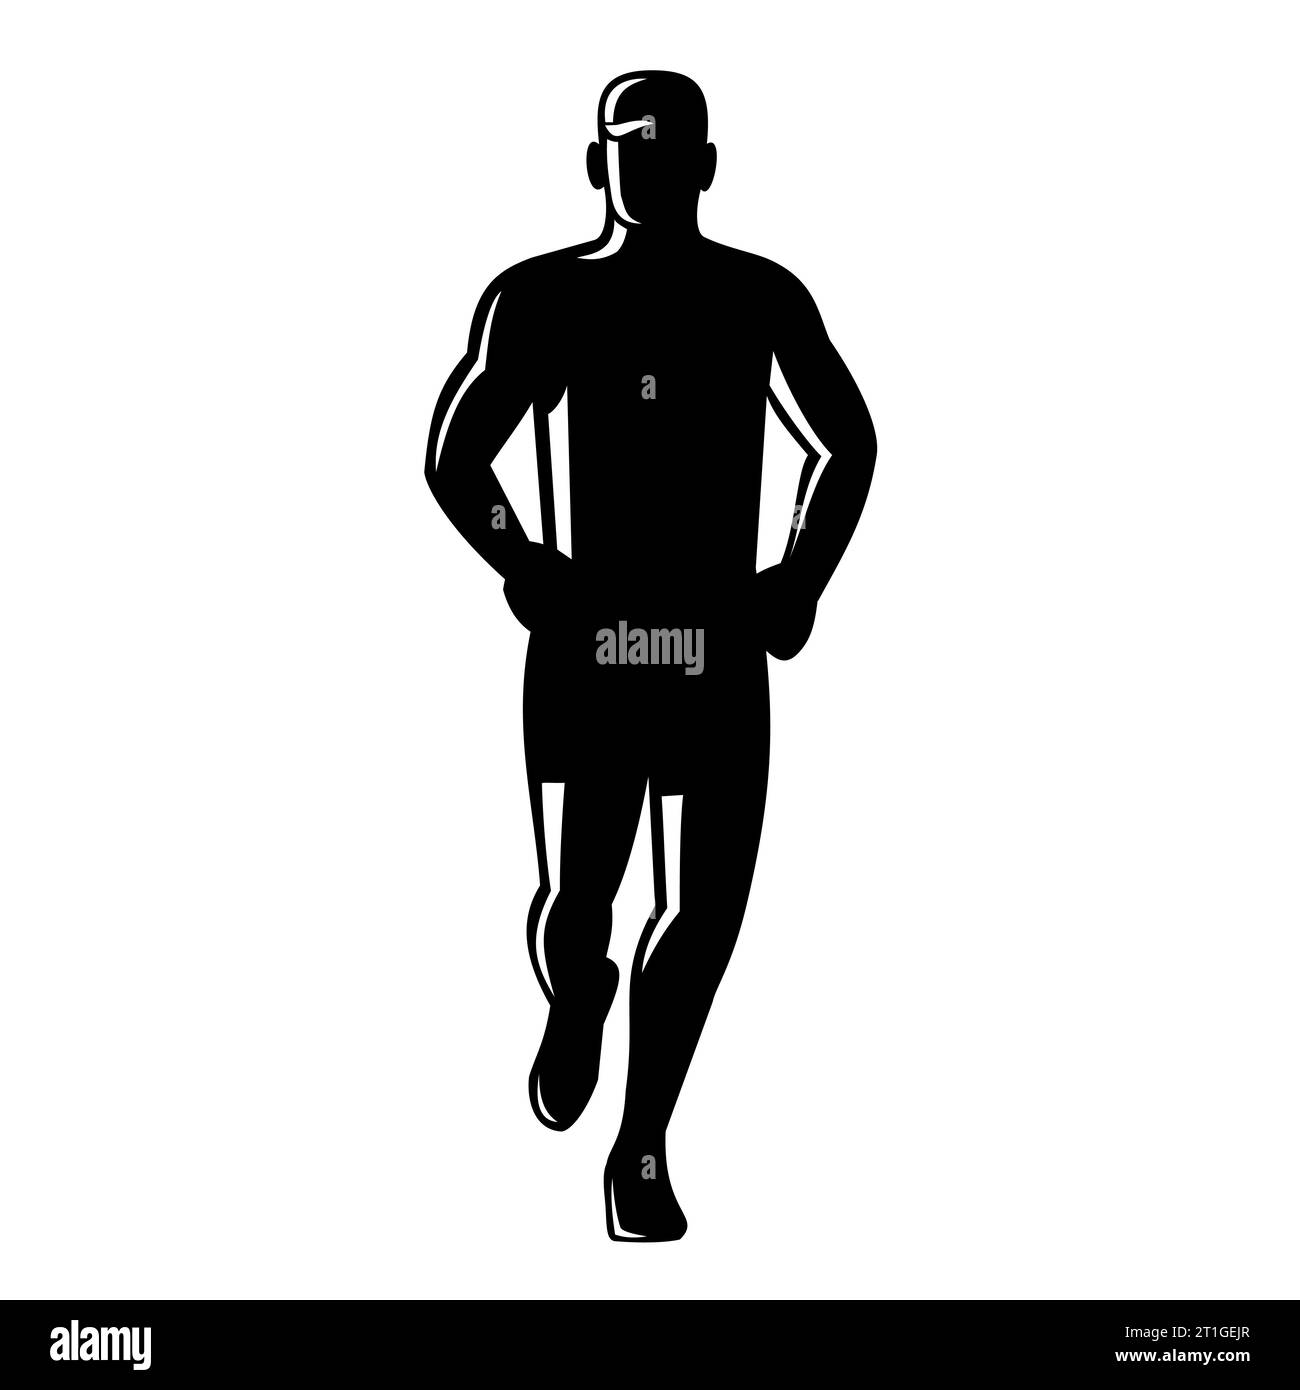 Retro style illustration of a male marathon runner running front view on isolated background done in black and white. Stock Photo